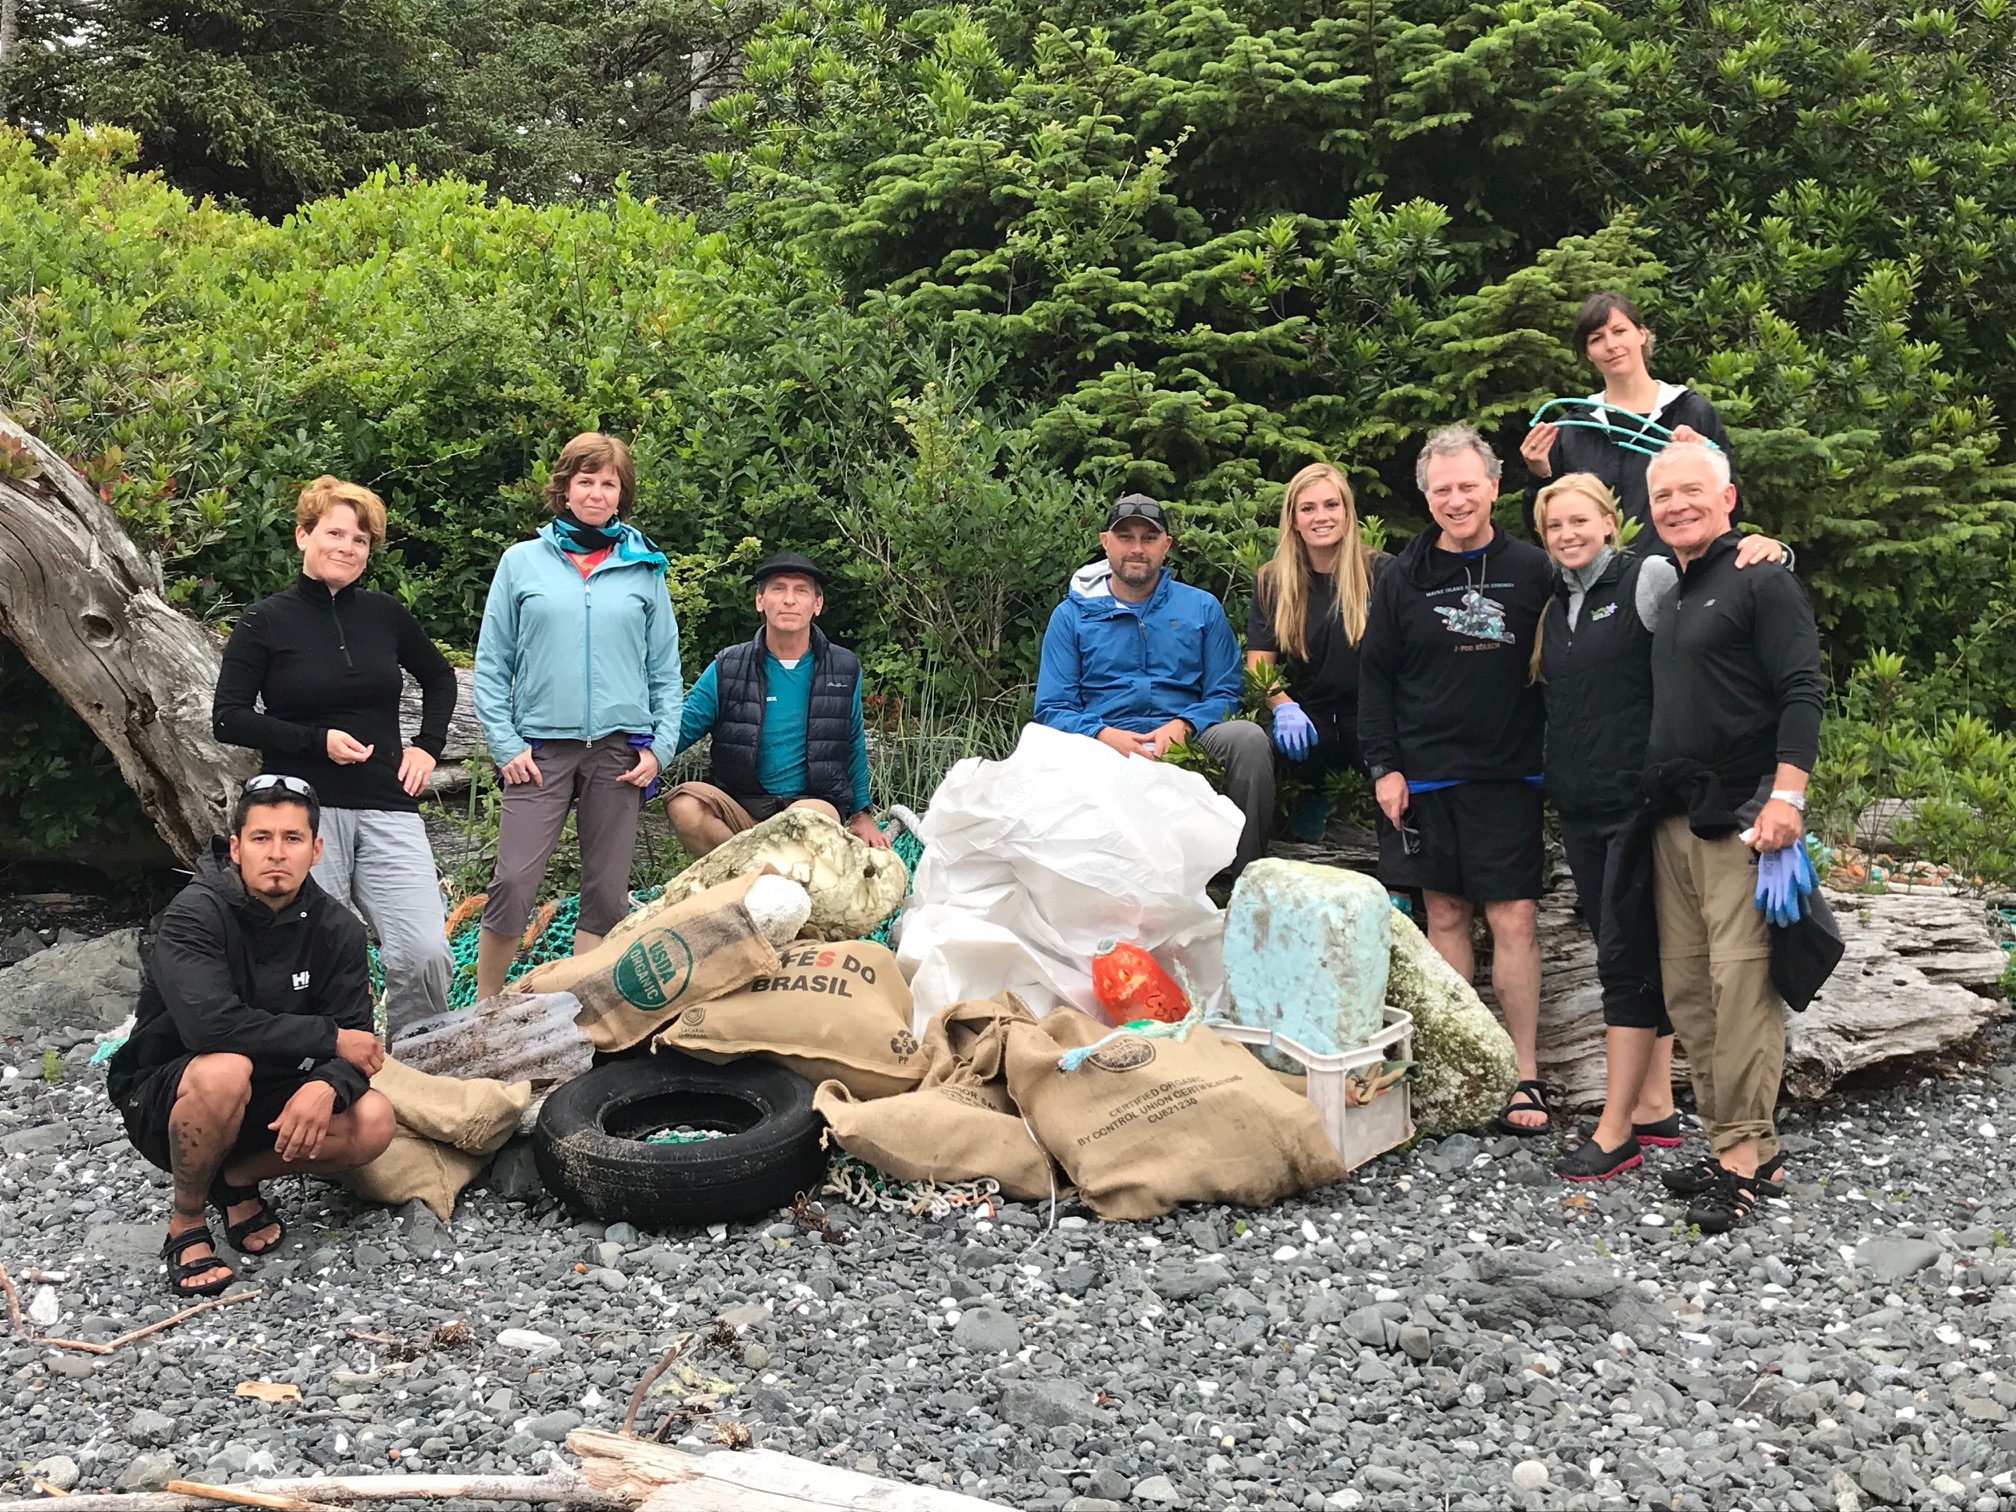 Beach clean-up debris from George Fraser Islands, July 5, 2019